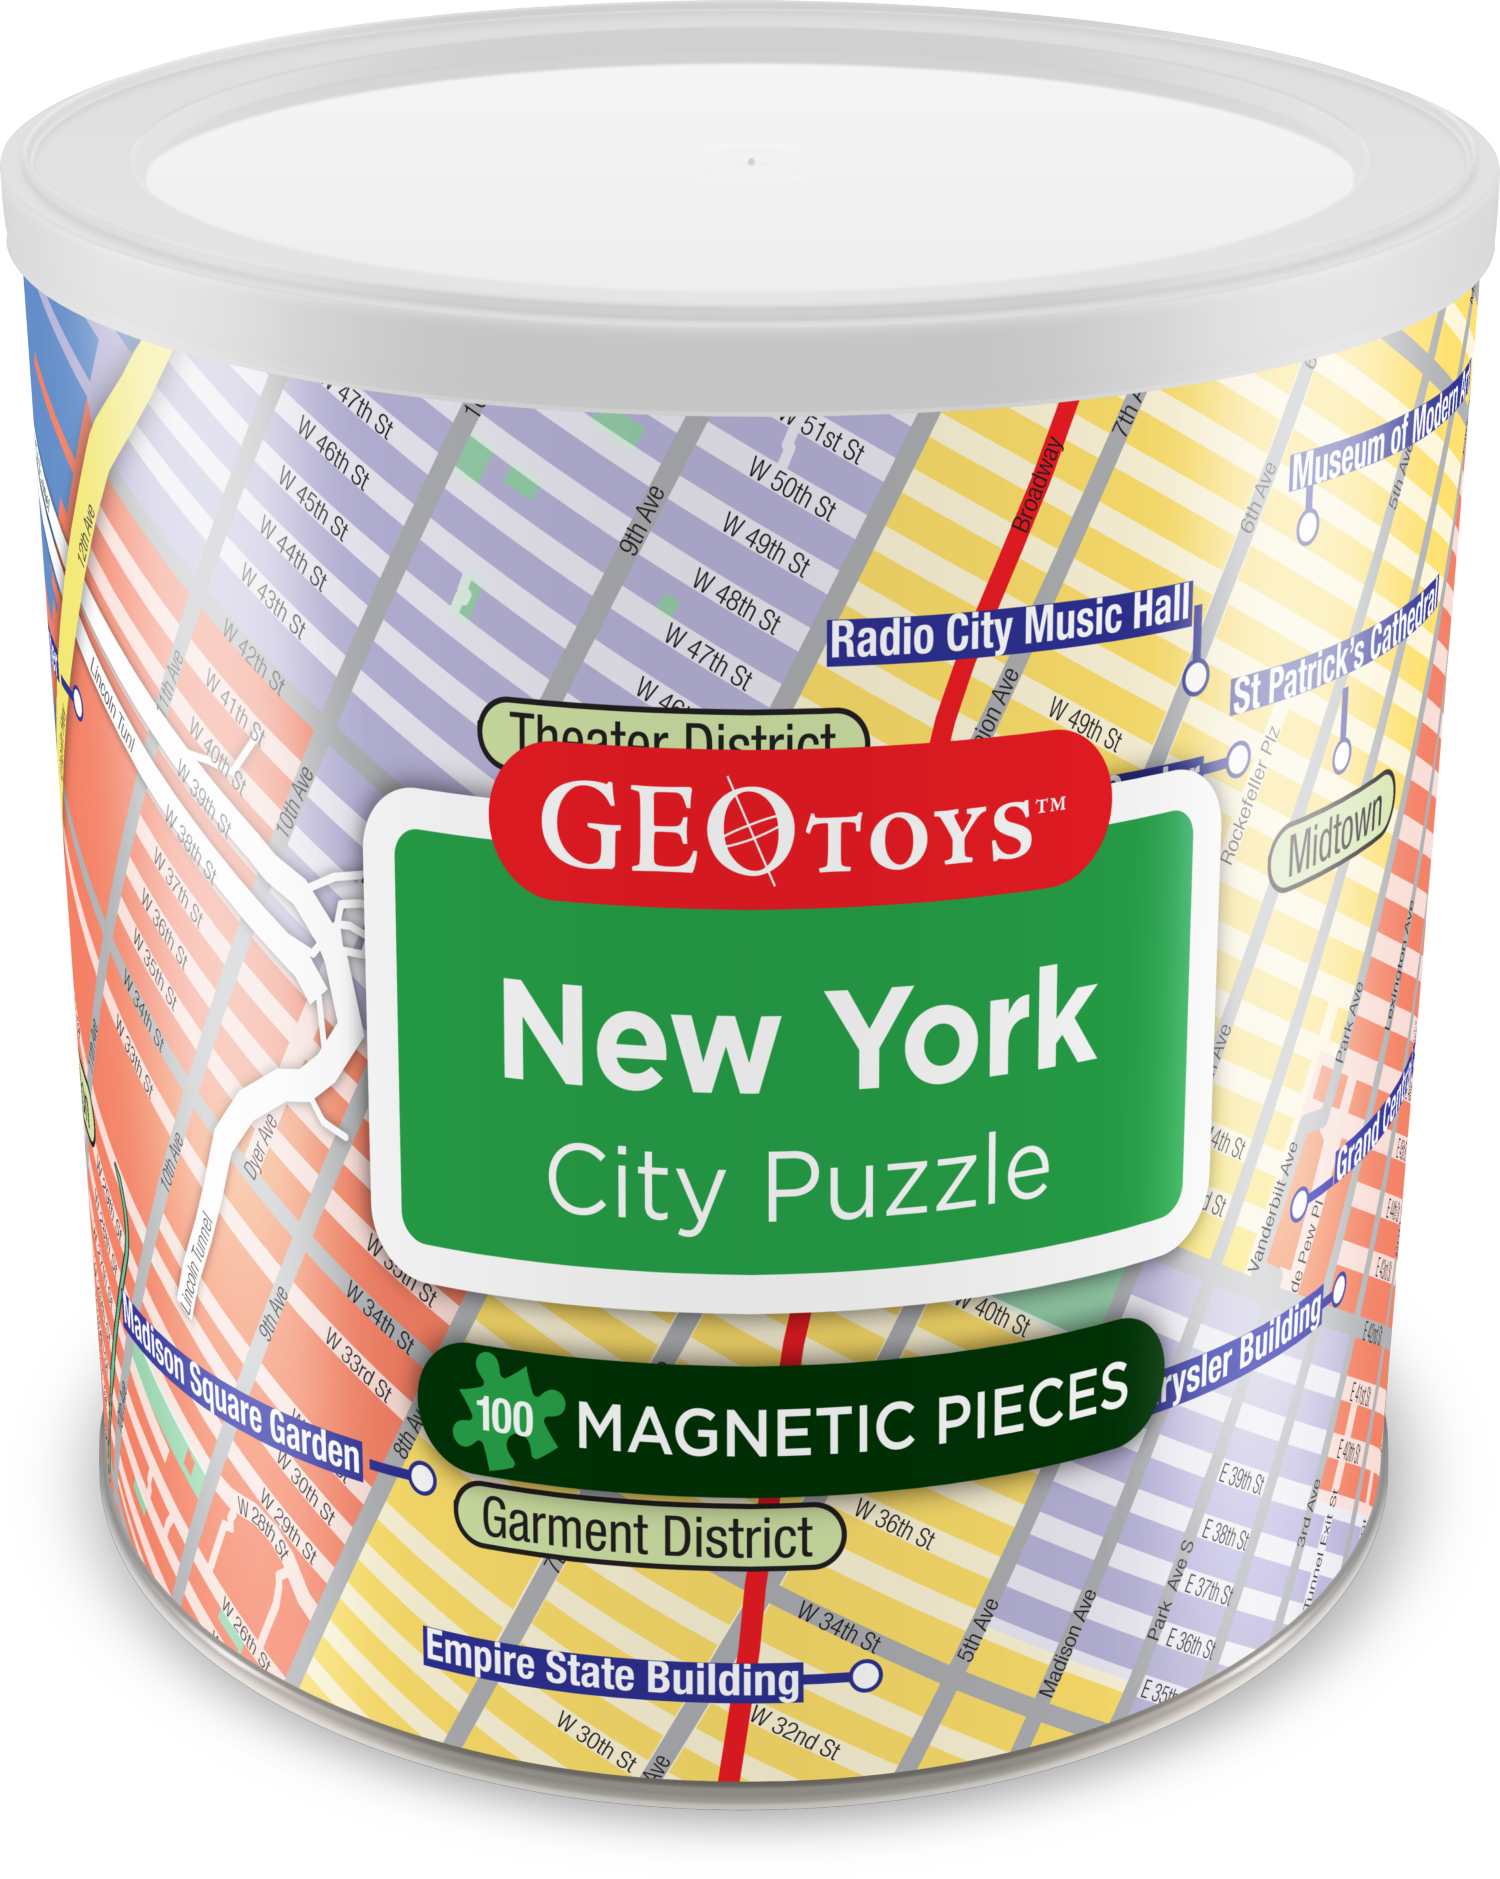 New York City Puzzle - Magnetic Puzzle Maps & Geography Jigsaw Puzzle